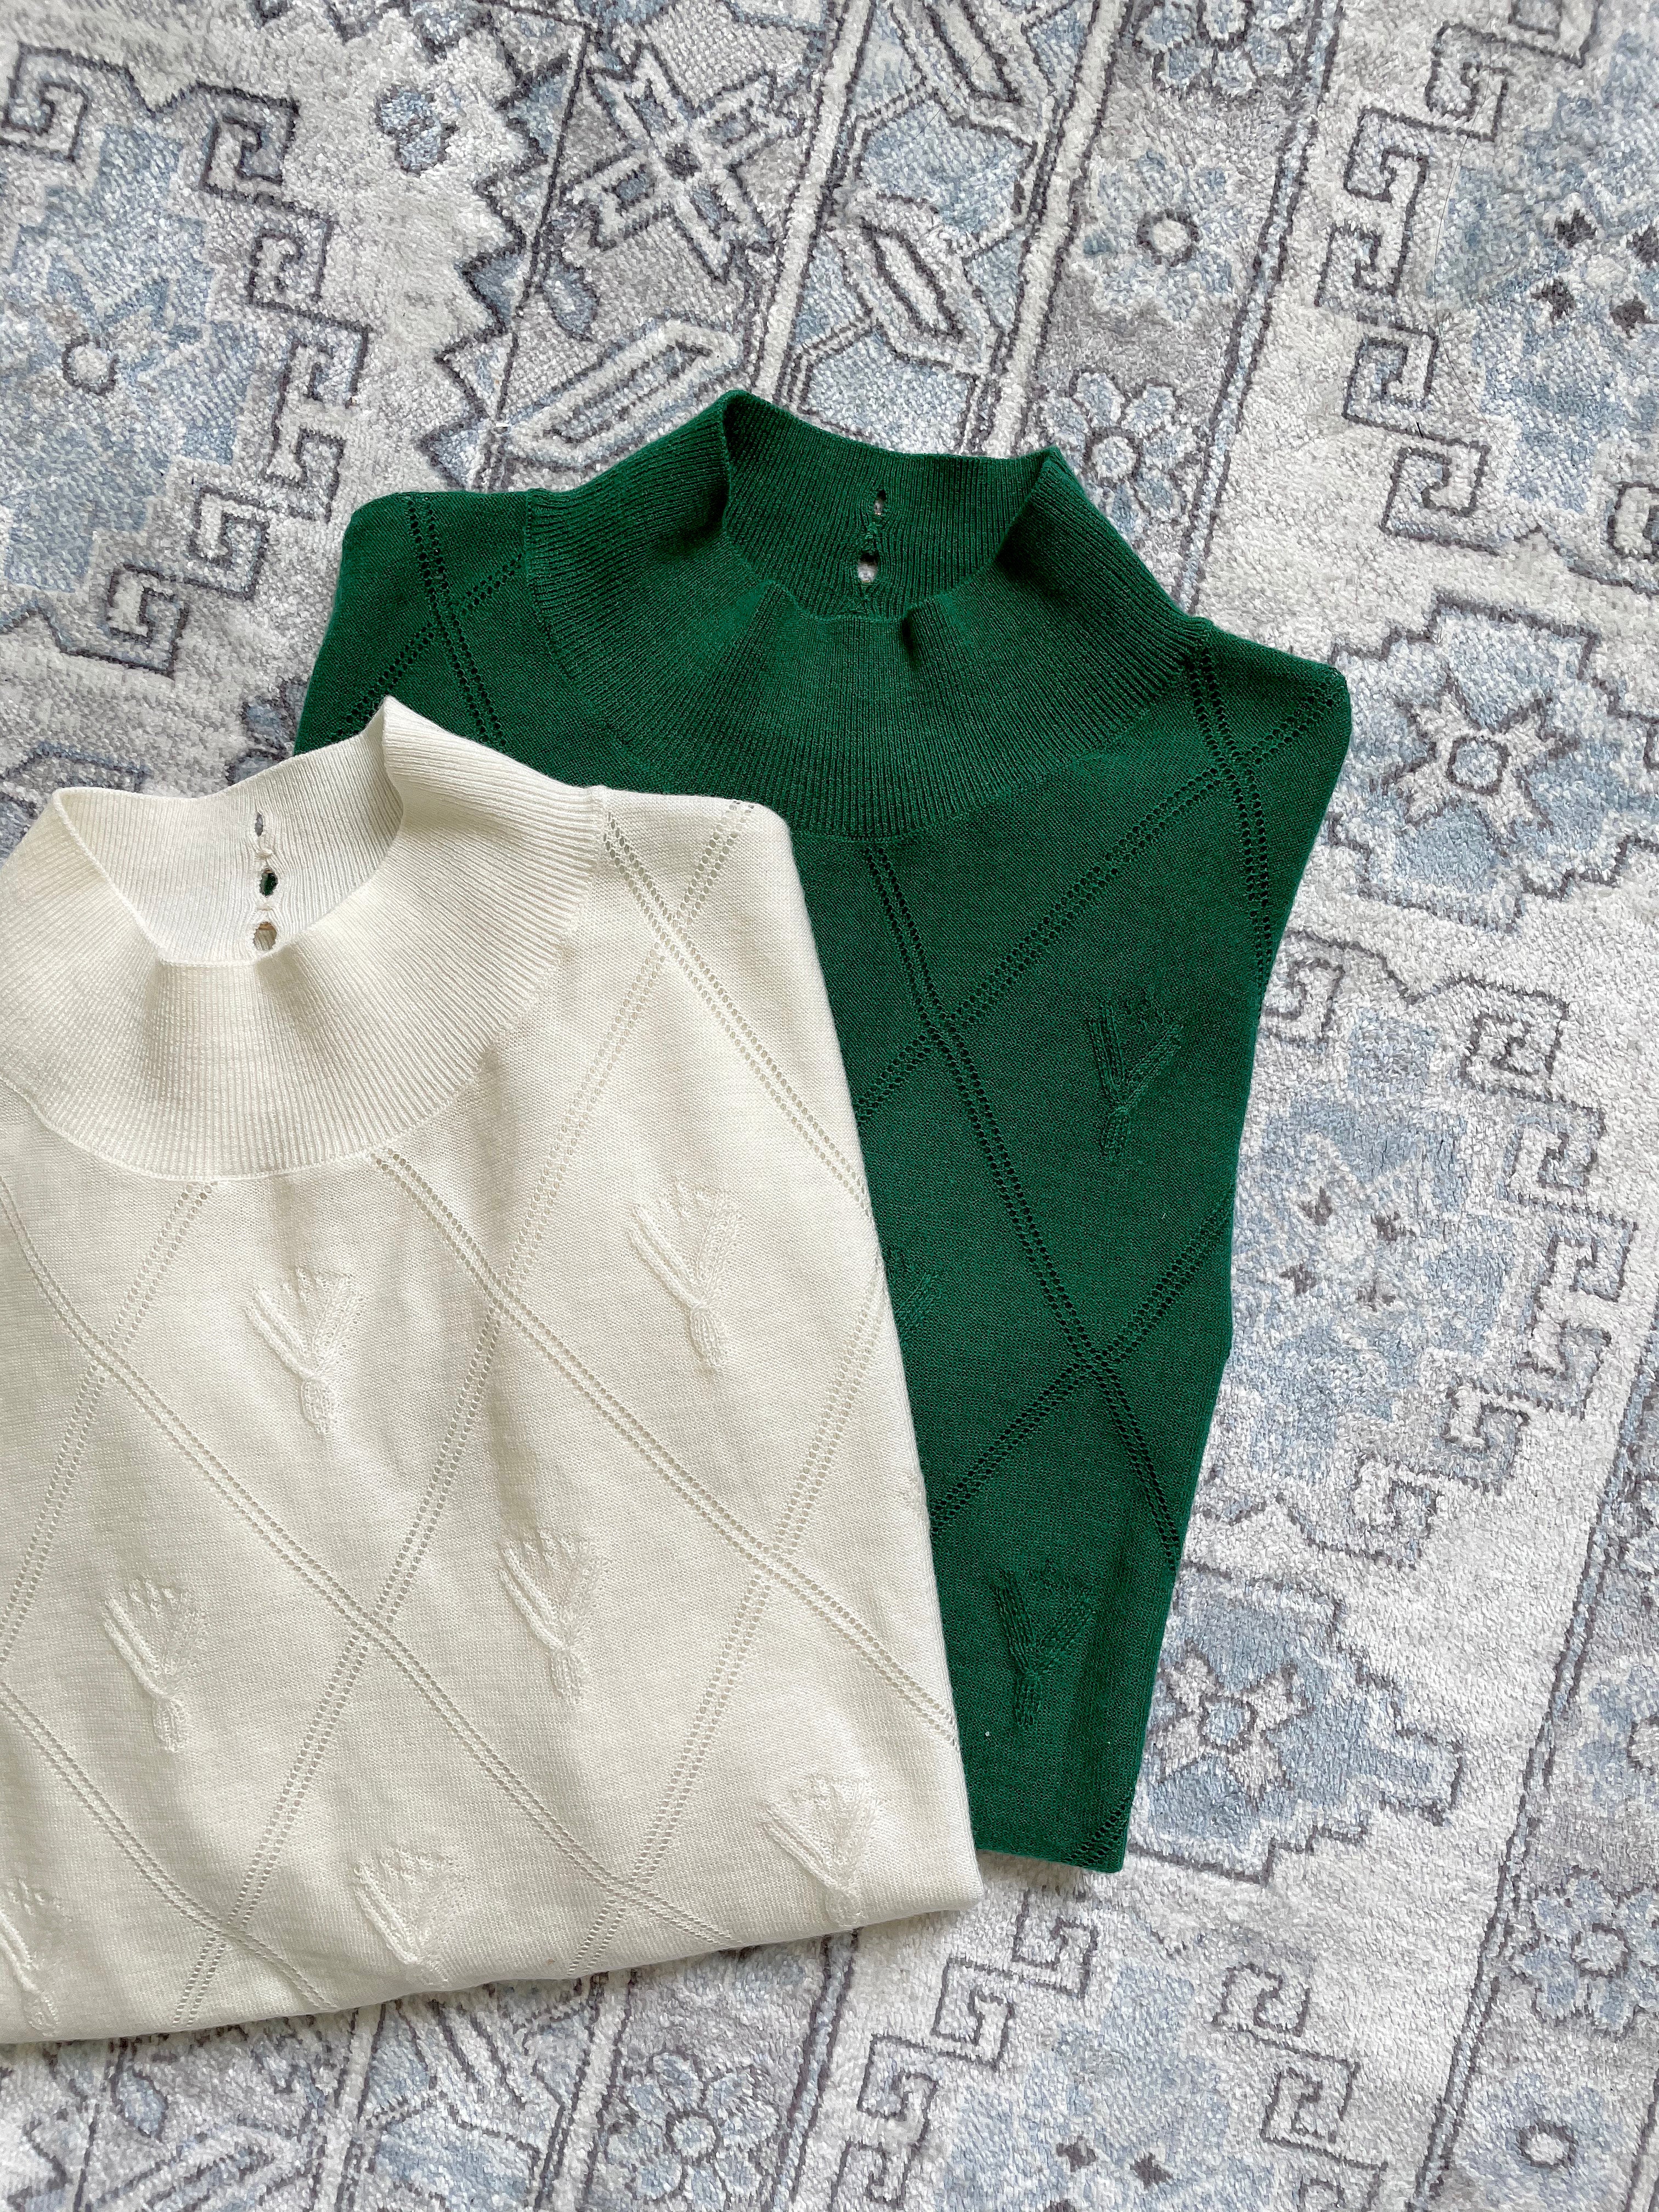 Copy of Jacquard Knit with Button Detail backing (white) 590 HKD